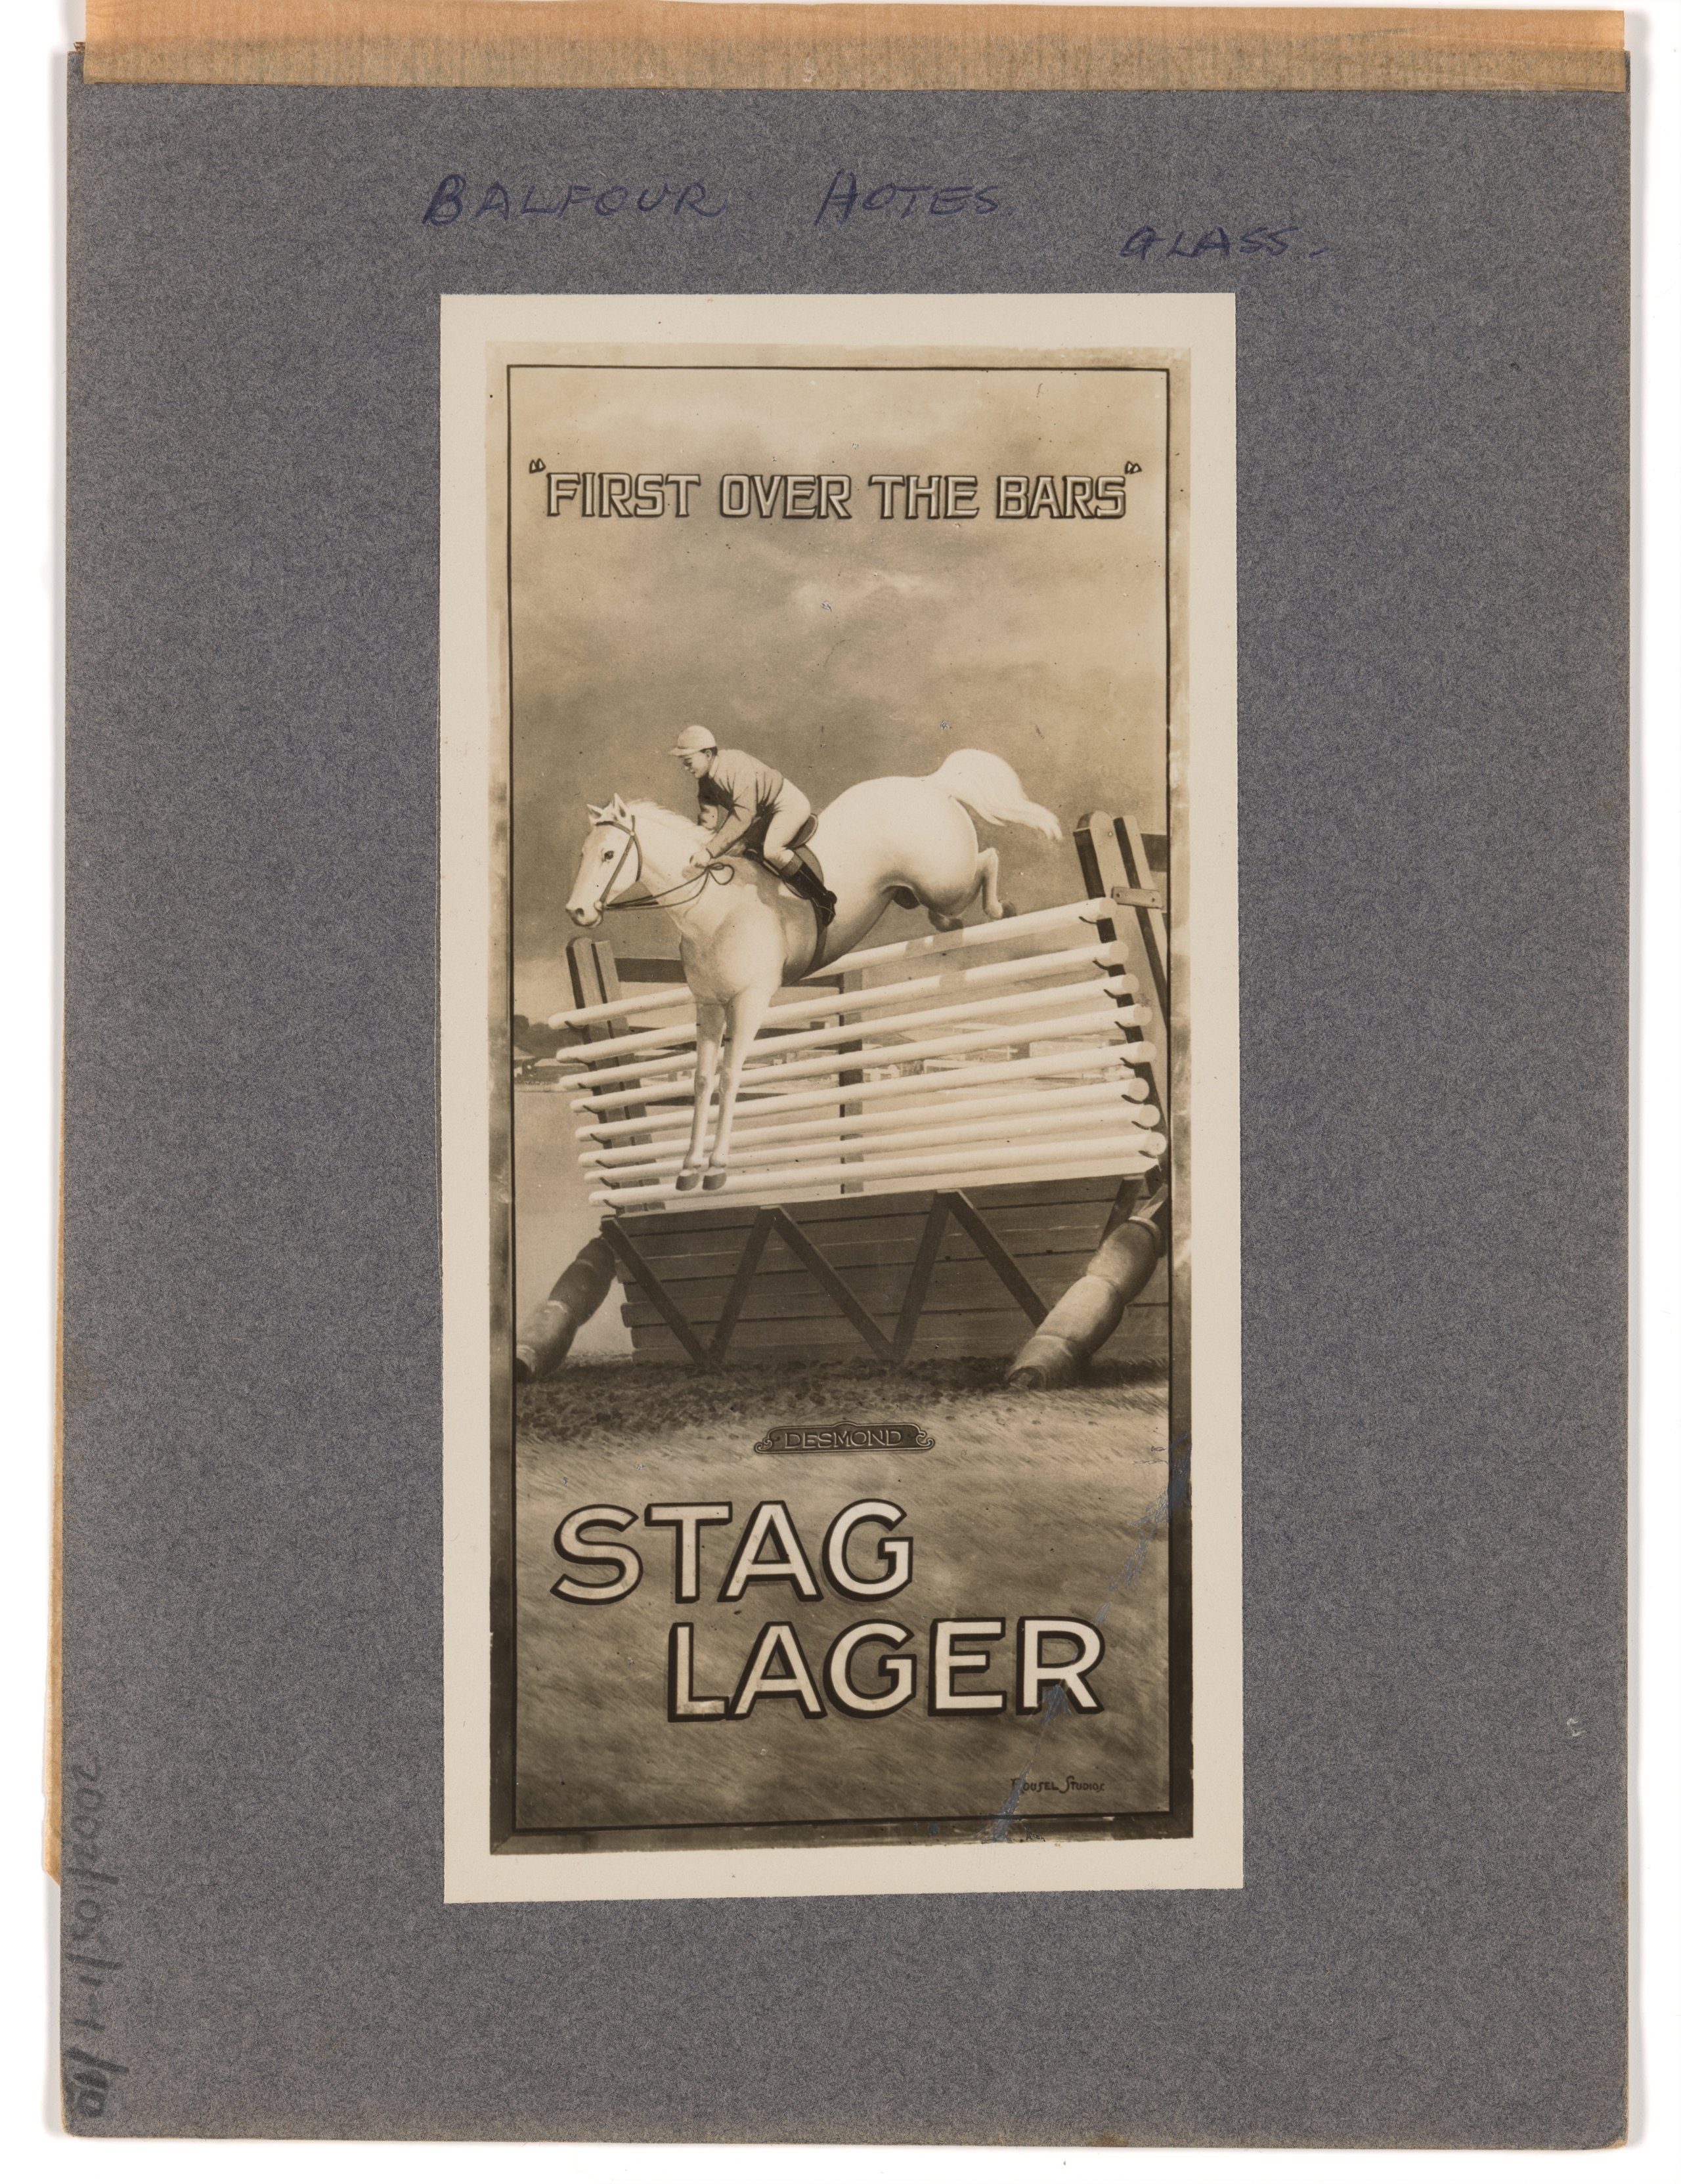 Photograph of glass pub sign for the Balfour Hotel advertising Toohey's Stag Lager